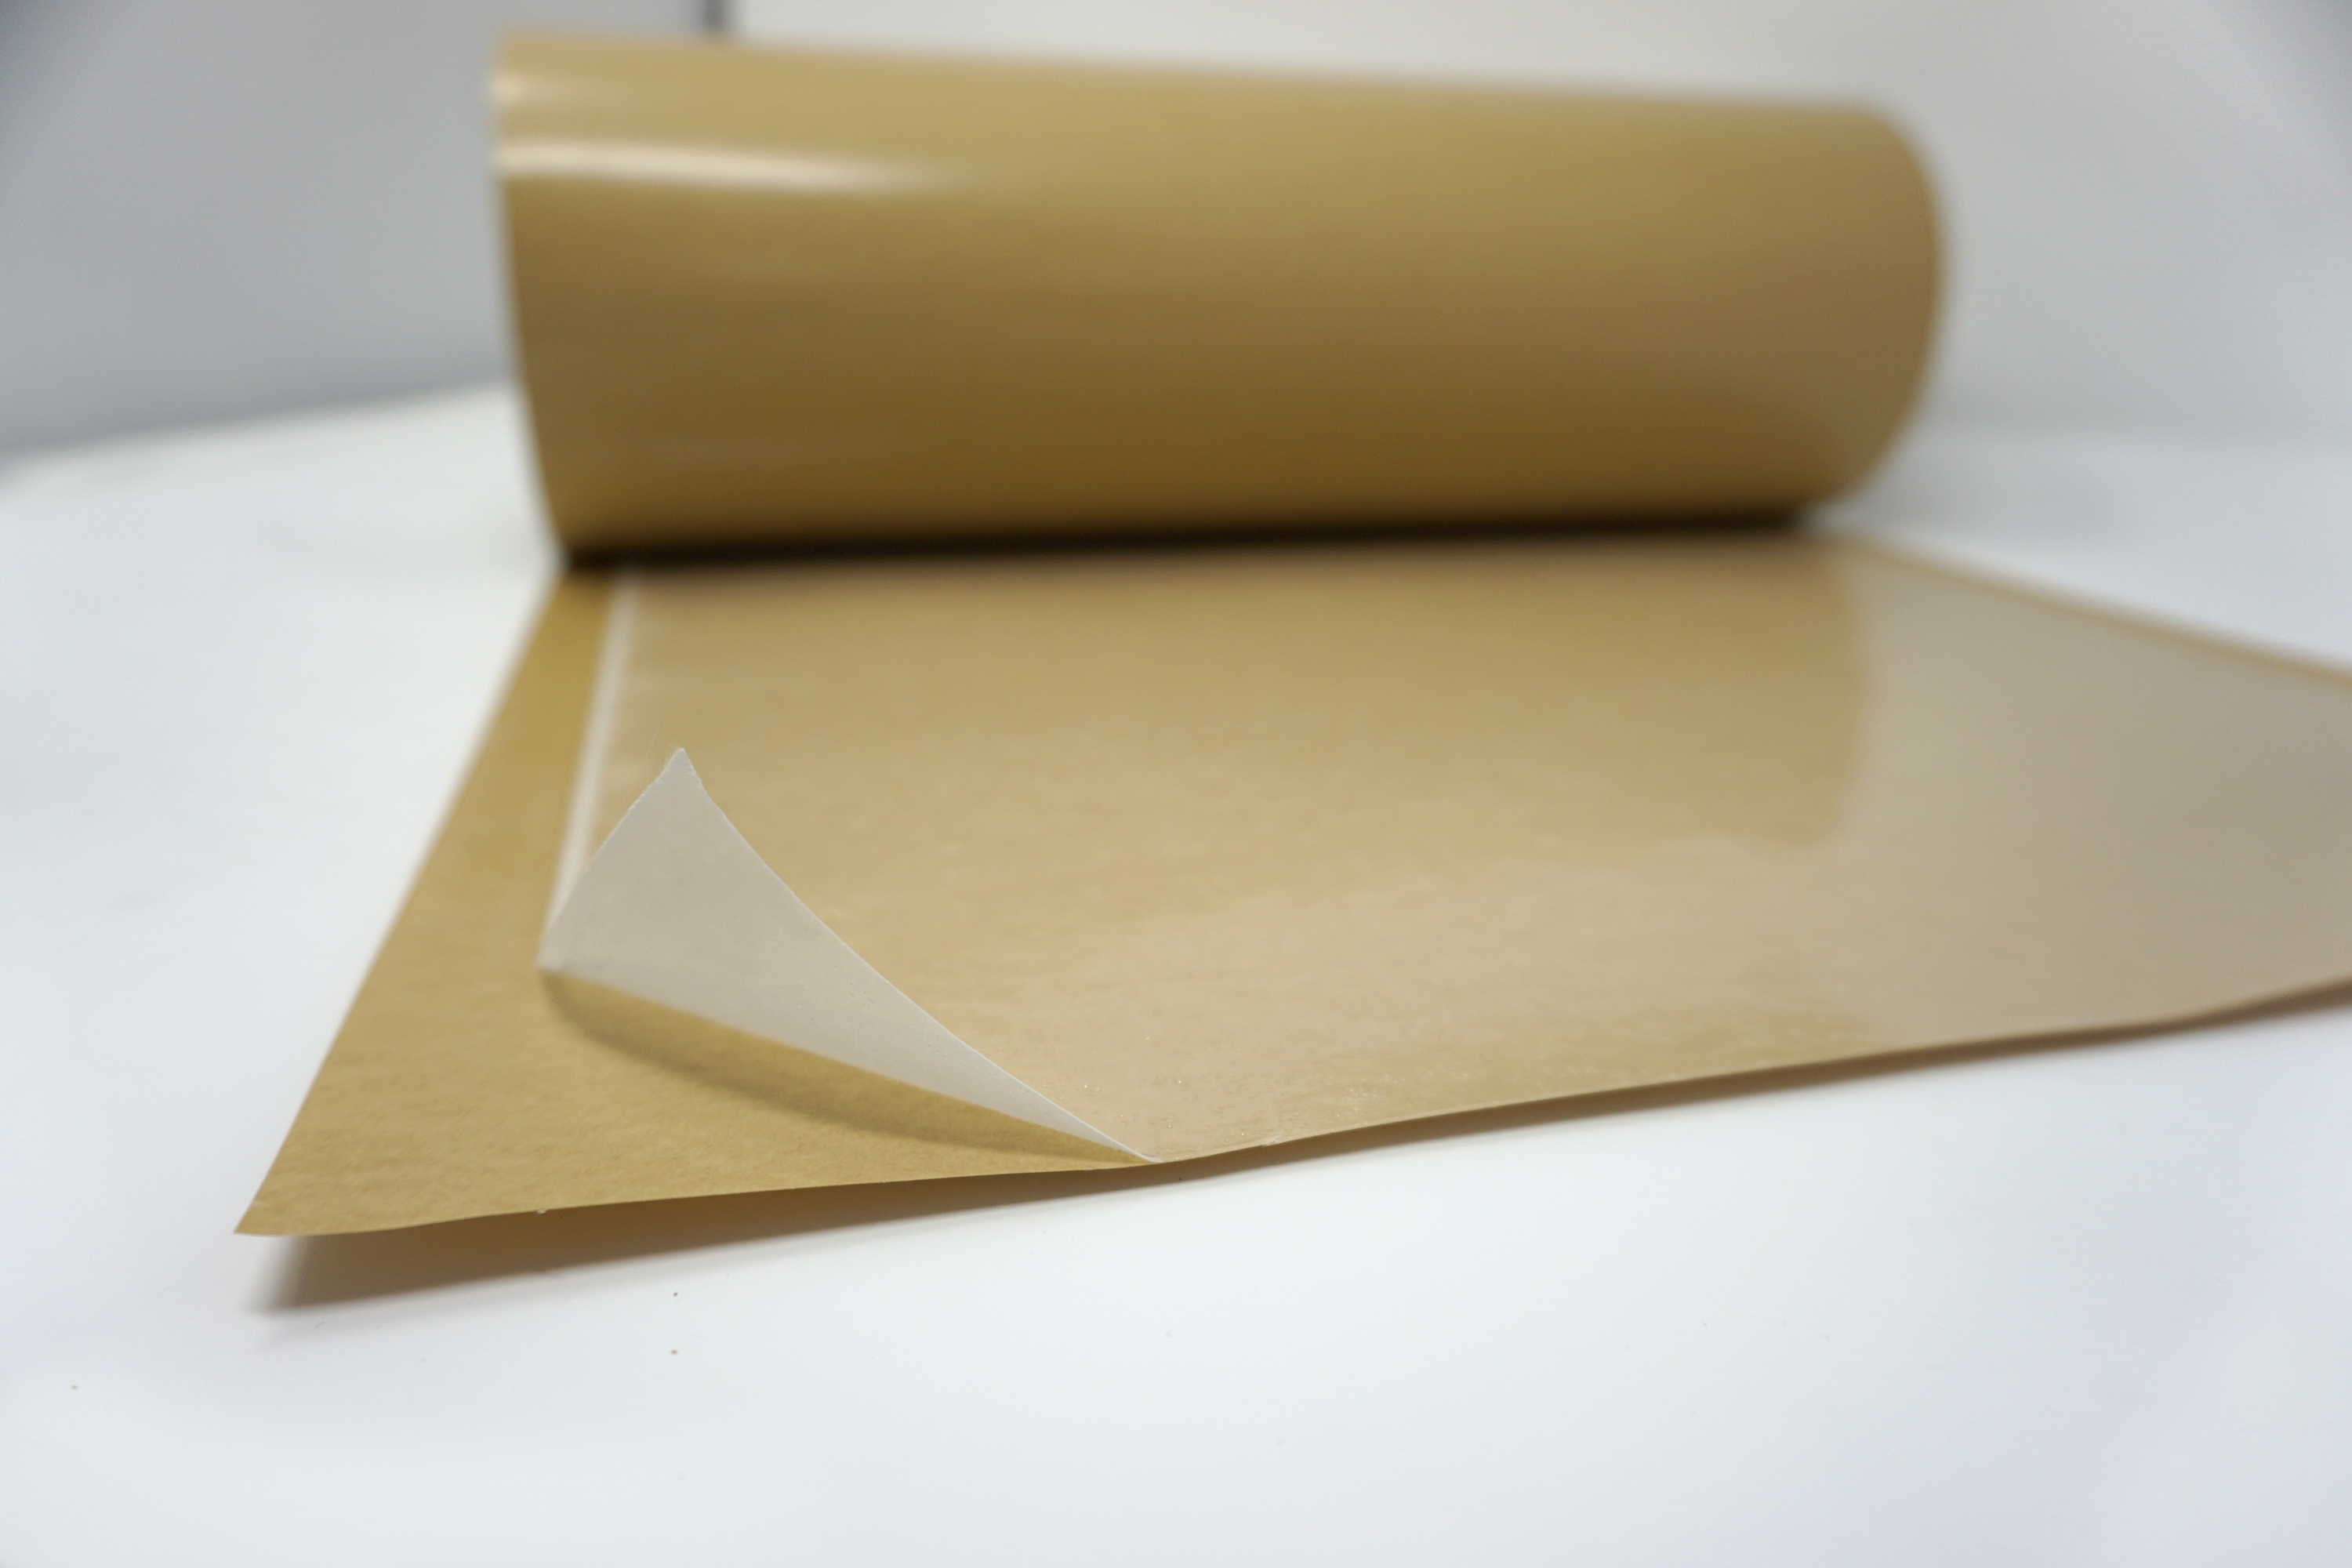 HexBond 679 250 gsm supported epoxy adhesive film is suitable for bonding sandwich structures.